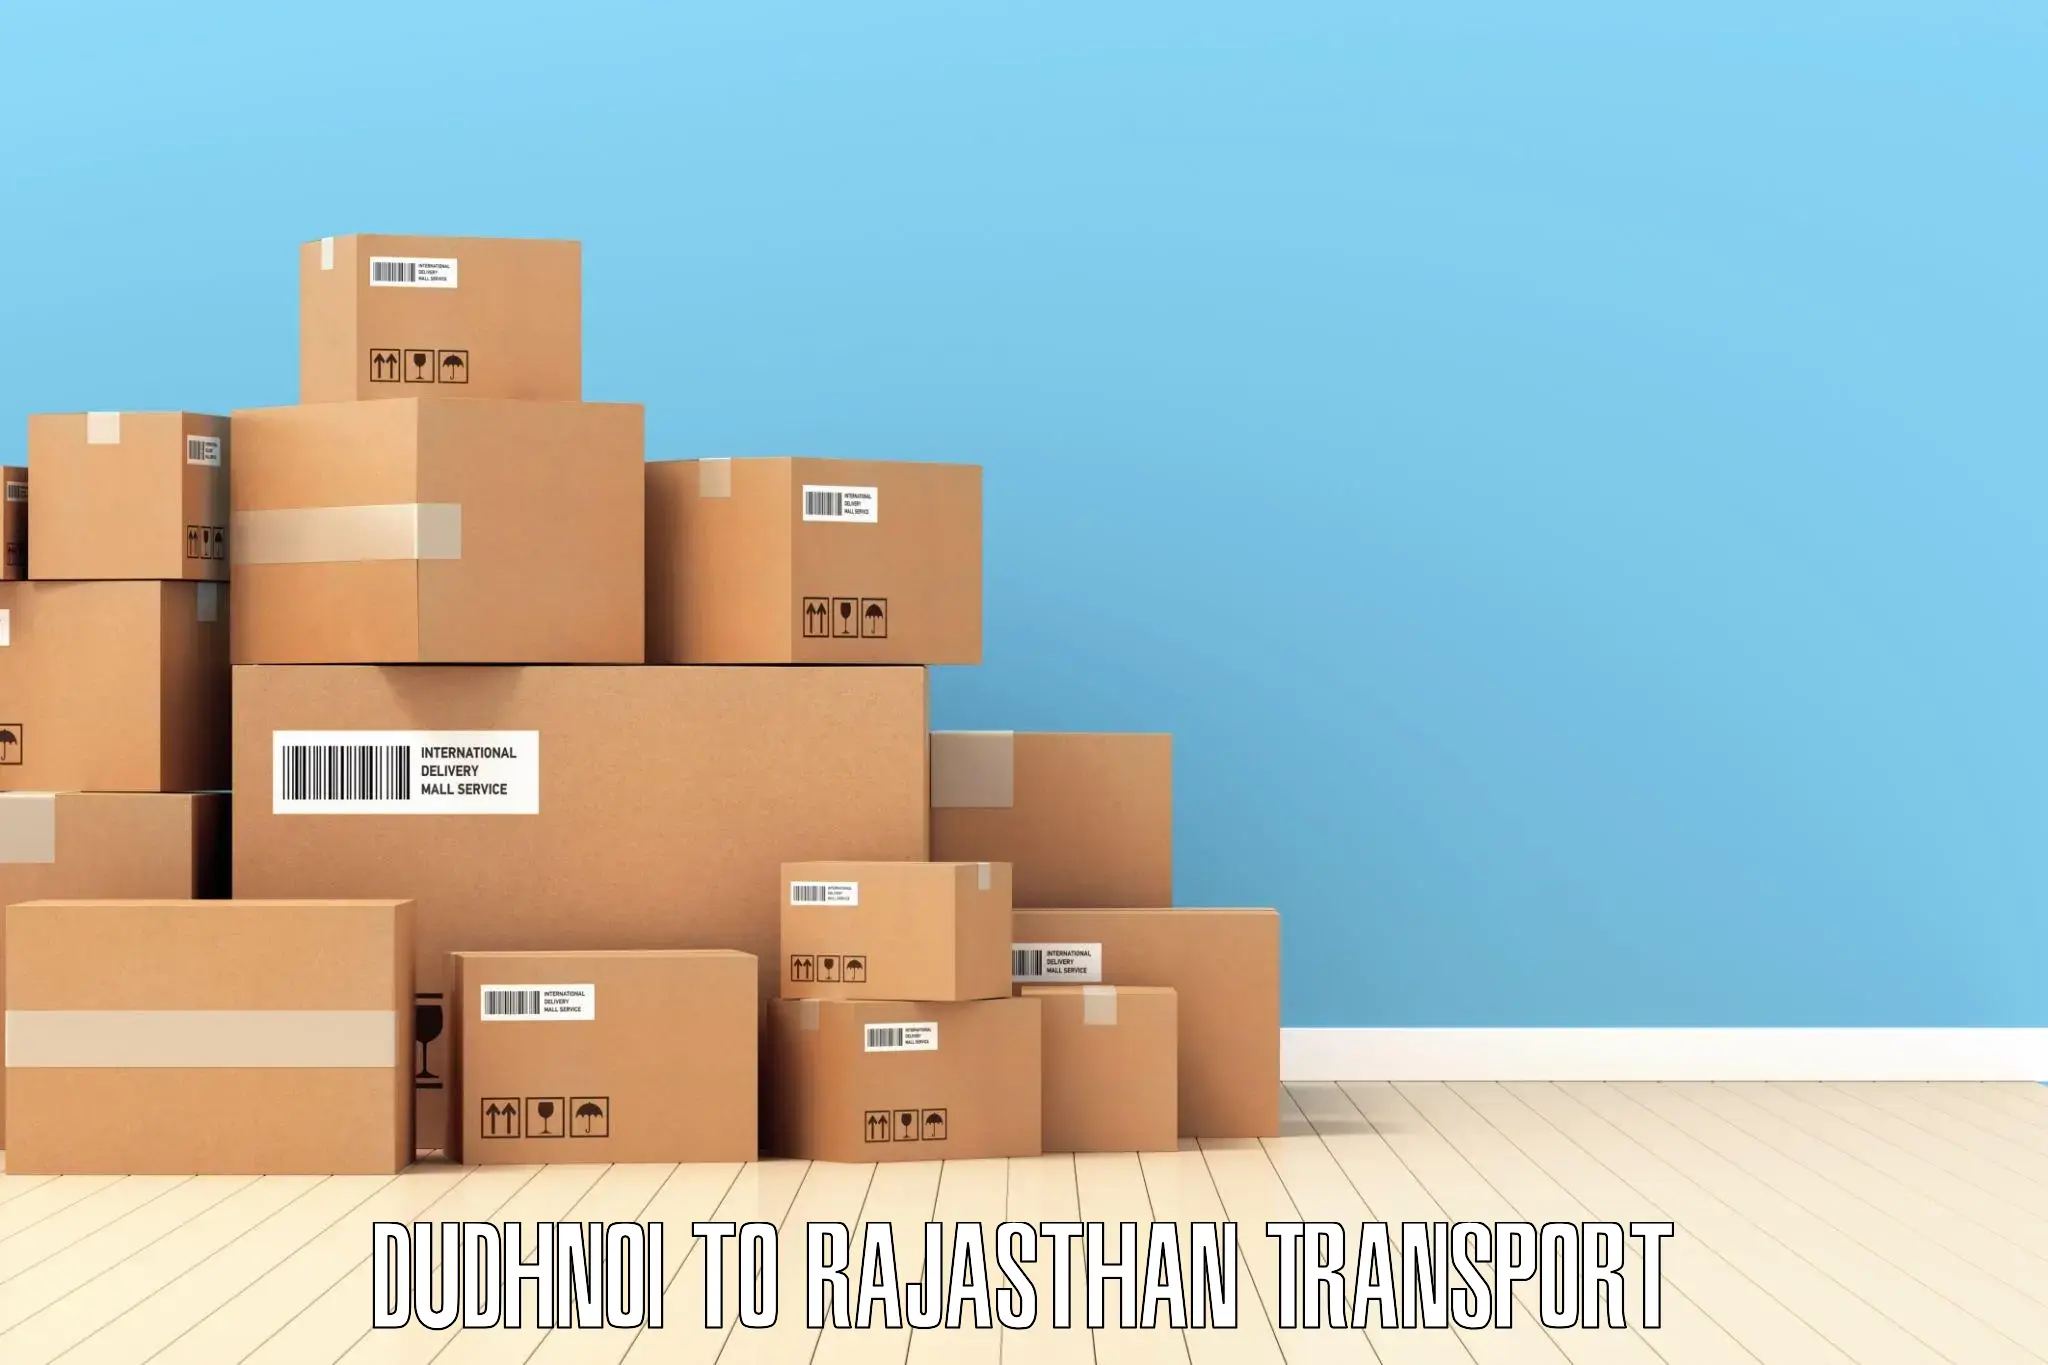 Daily parcel service transport in Dudhnoi to Jaipur